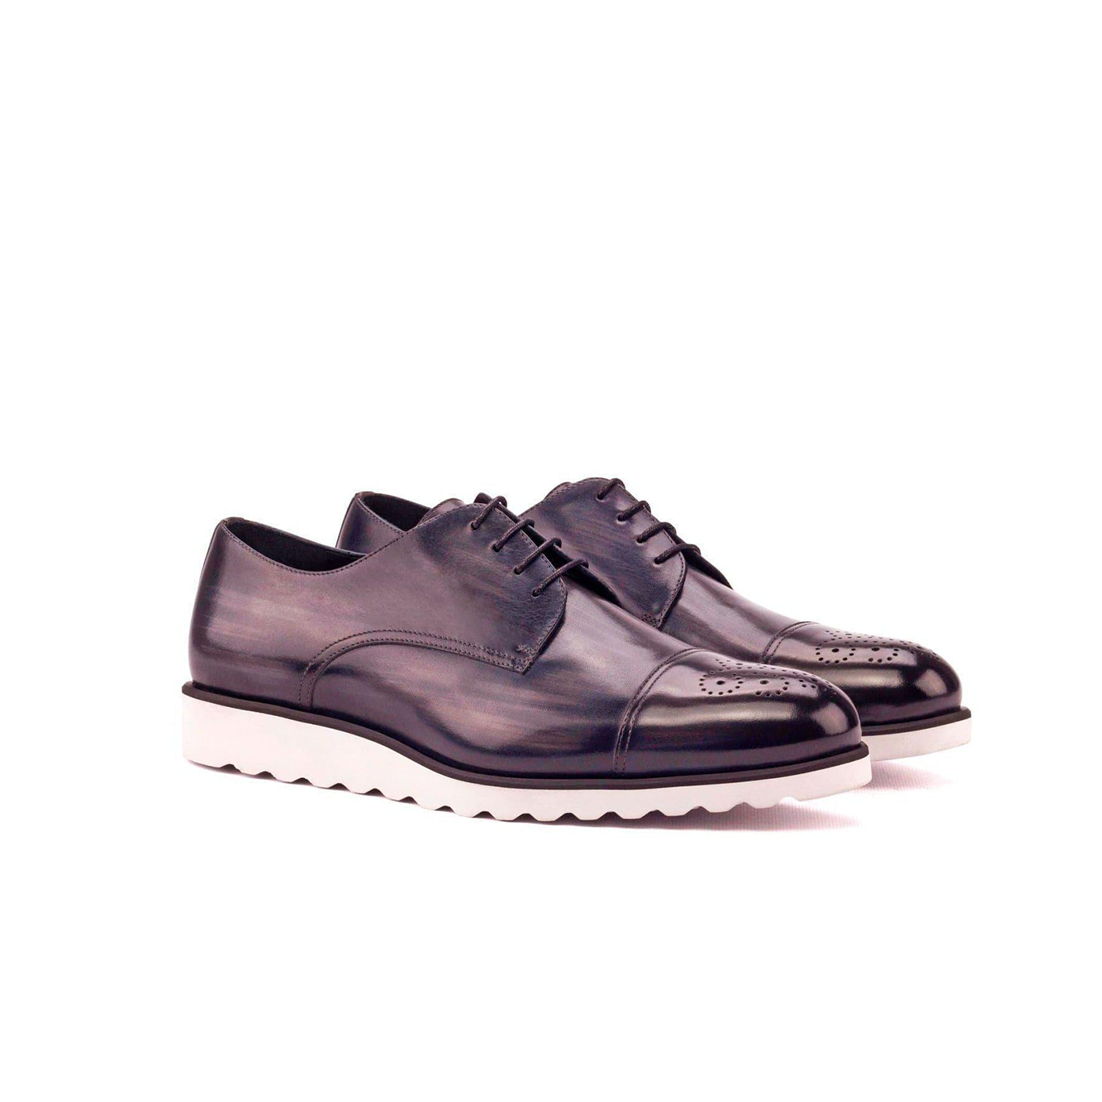 Moonlight Mirage Derby Shoes